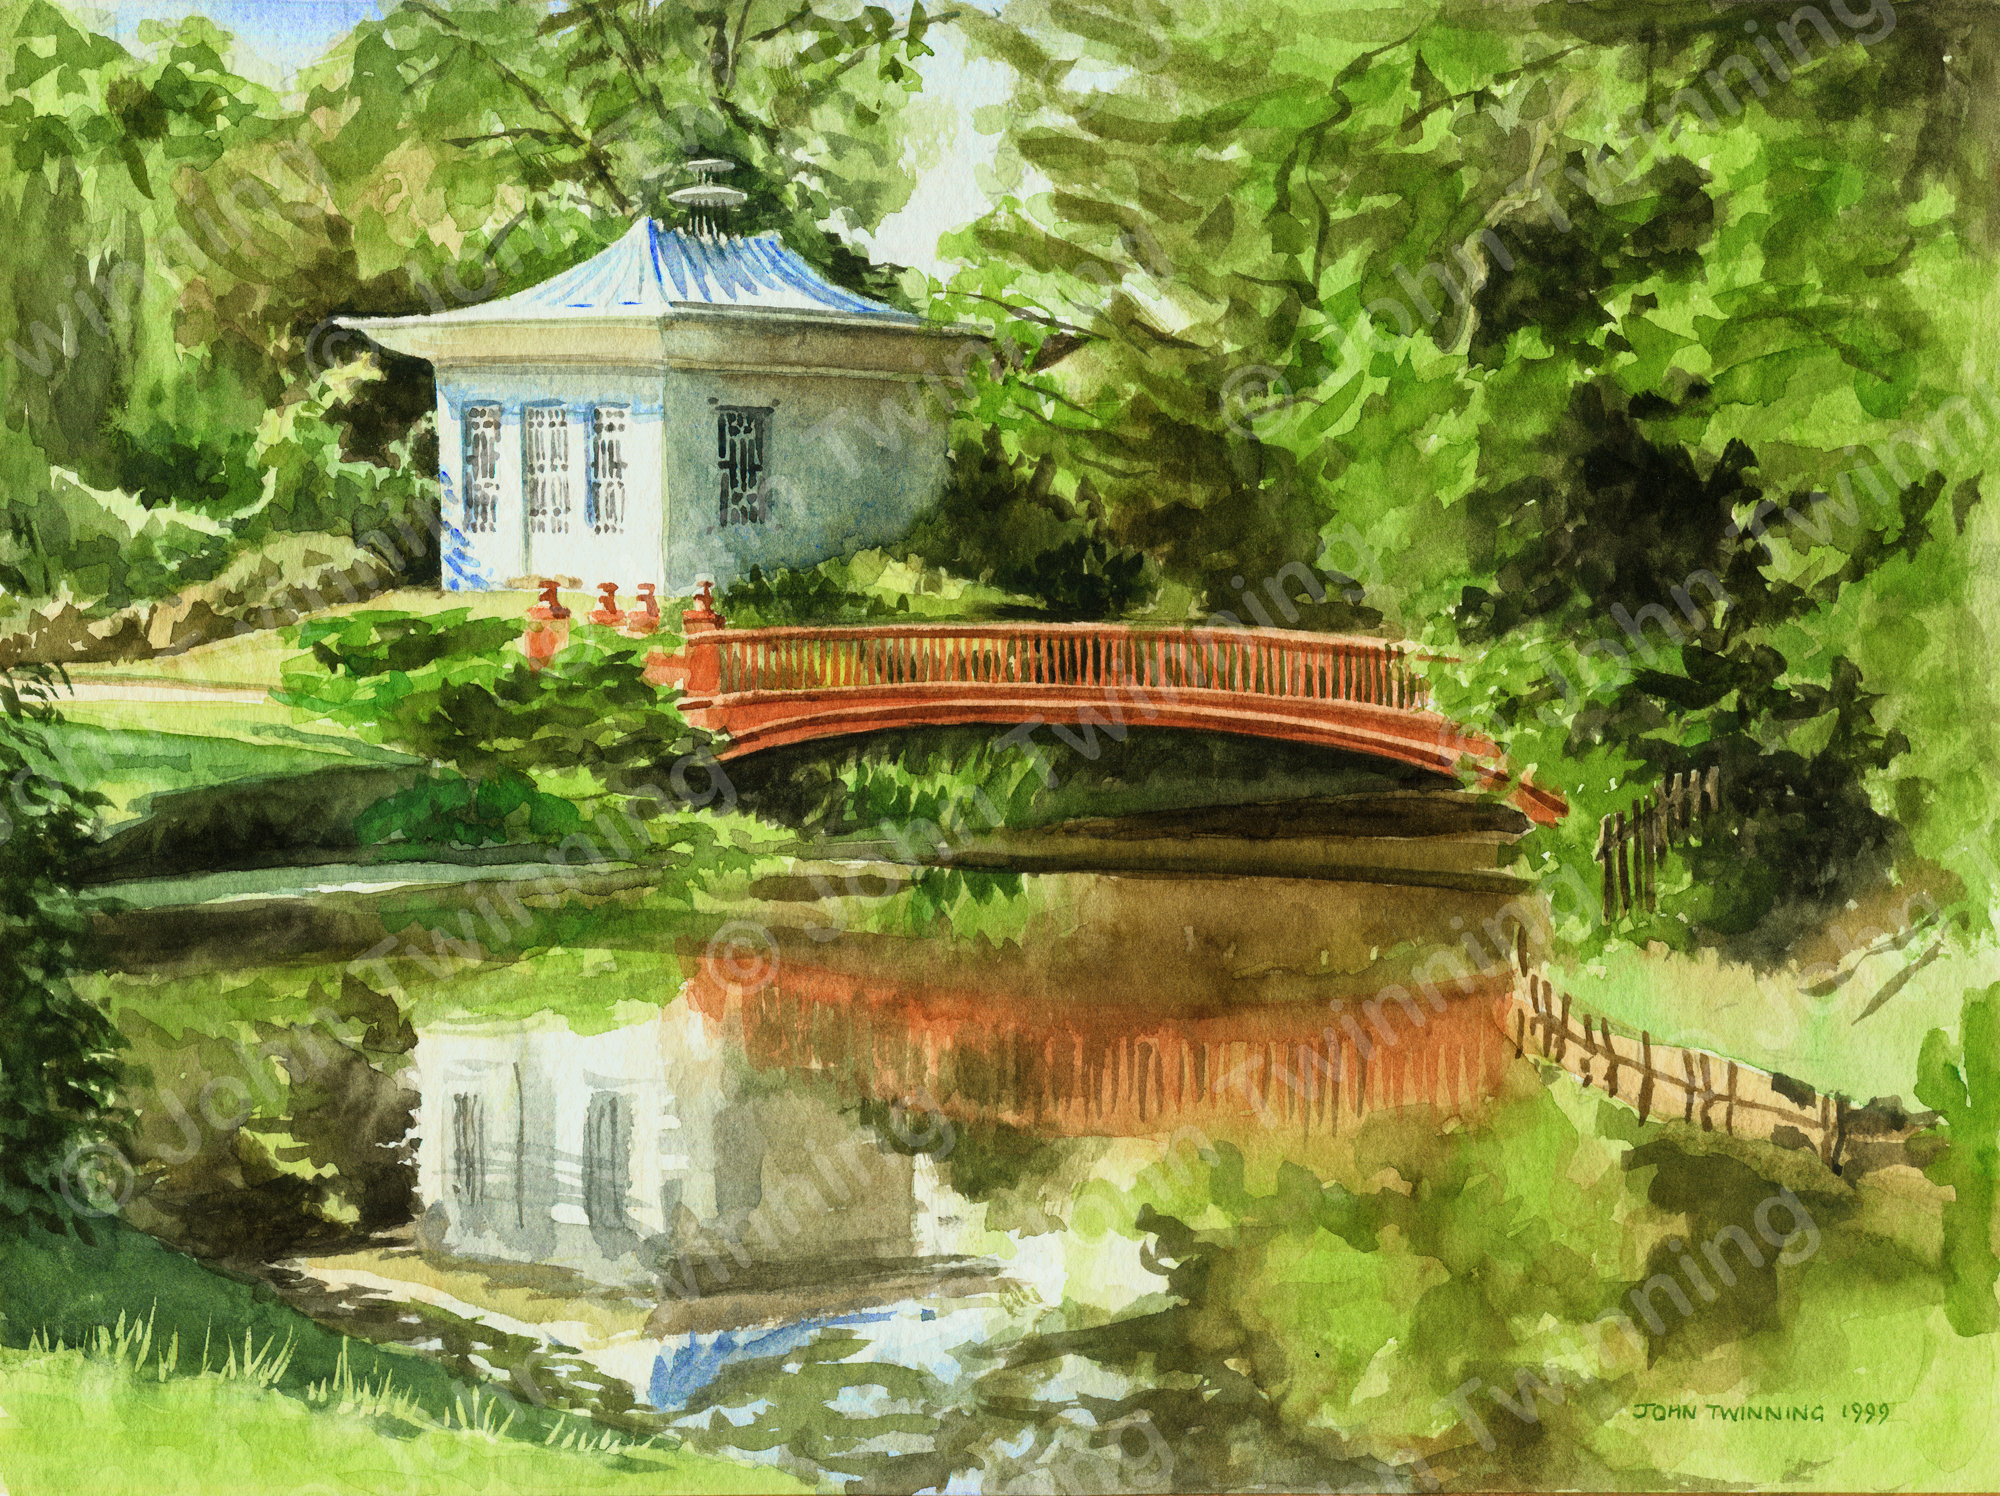 'The Chinese House, Shugborough Hall, Staffordshire' - art print from a watercolour painting of this building reflected in water